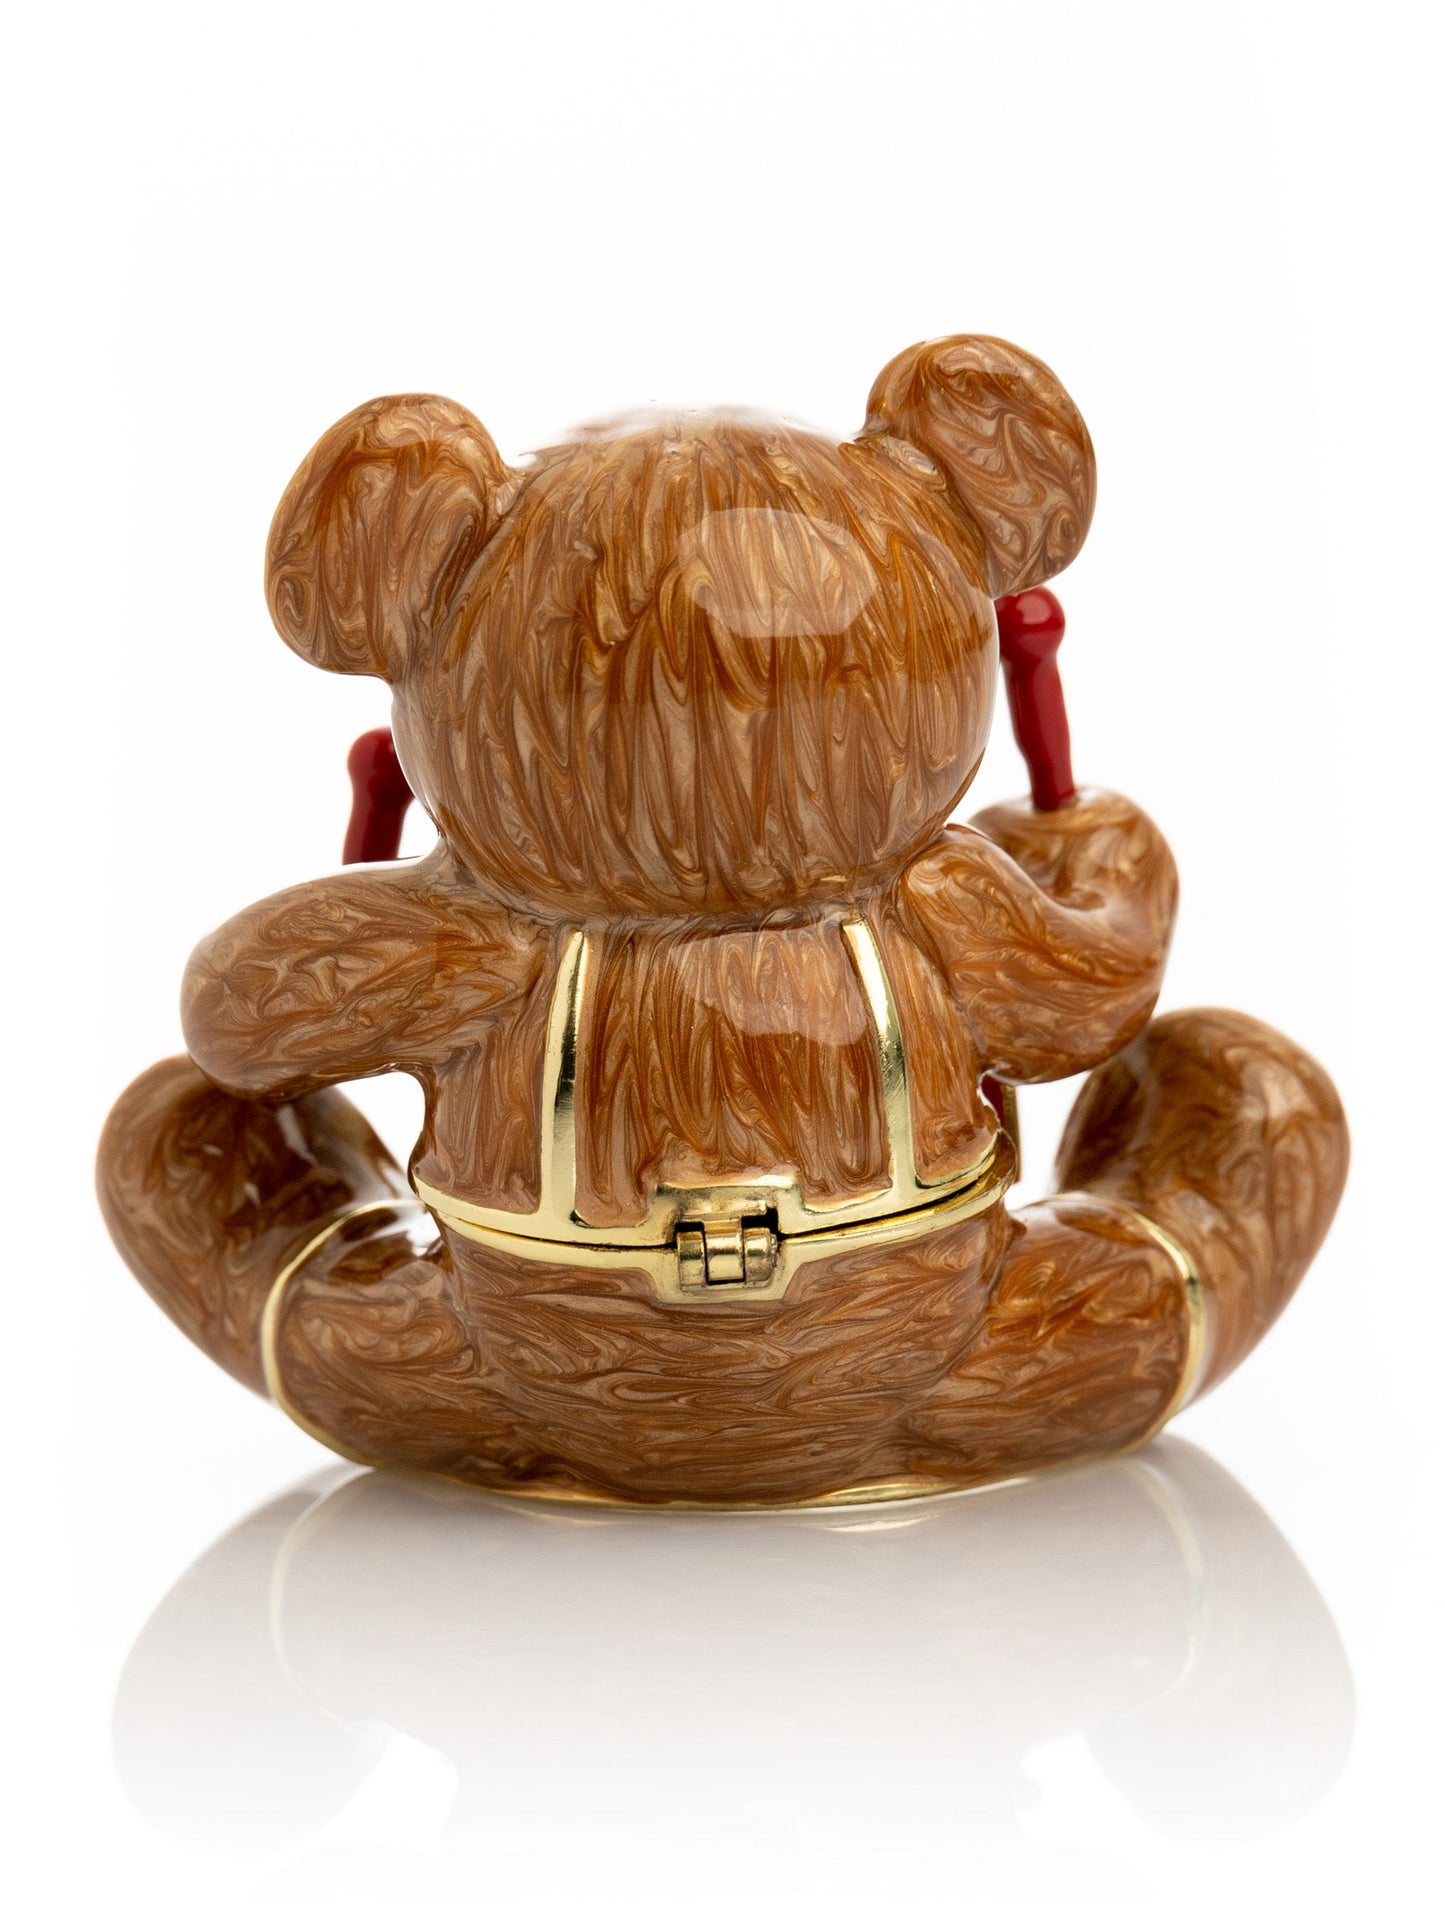 Brown Bear with Clock in a Drum